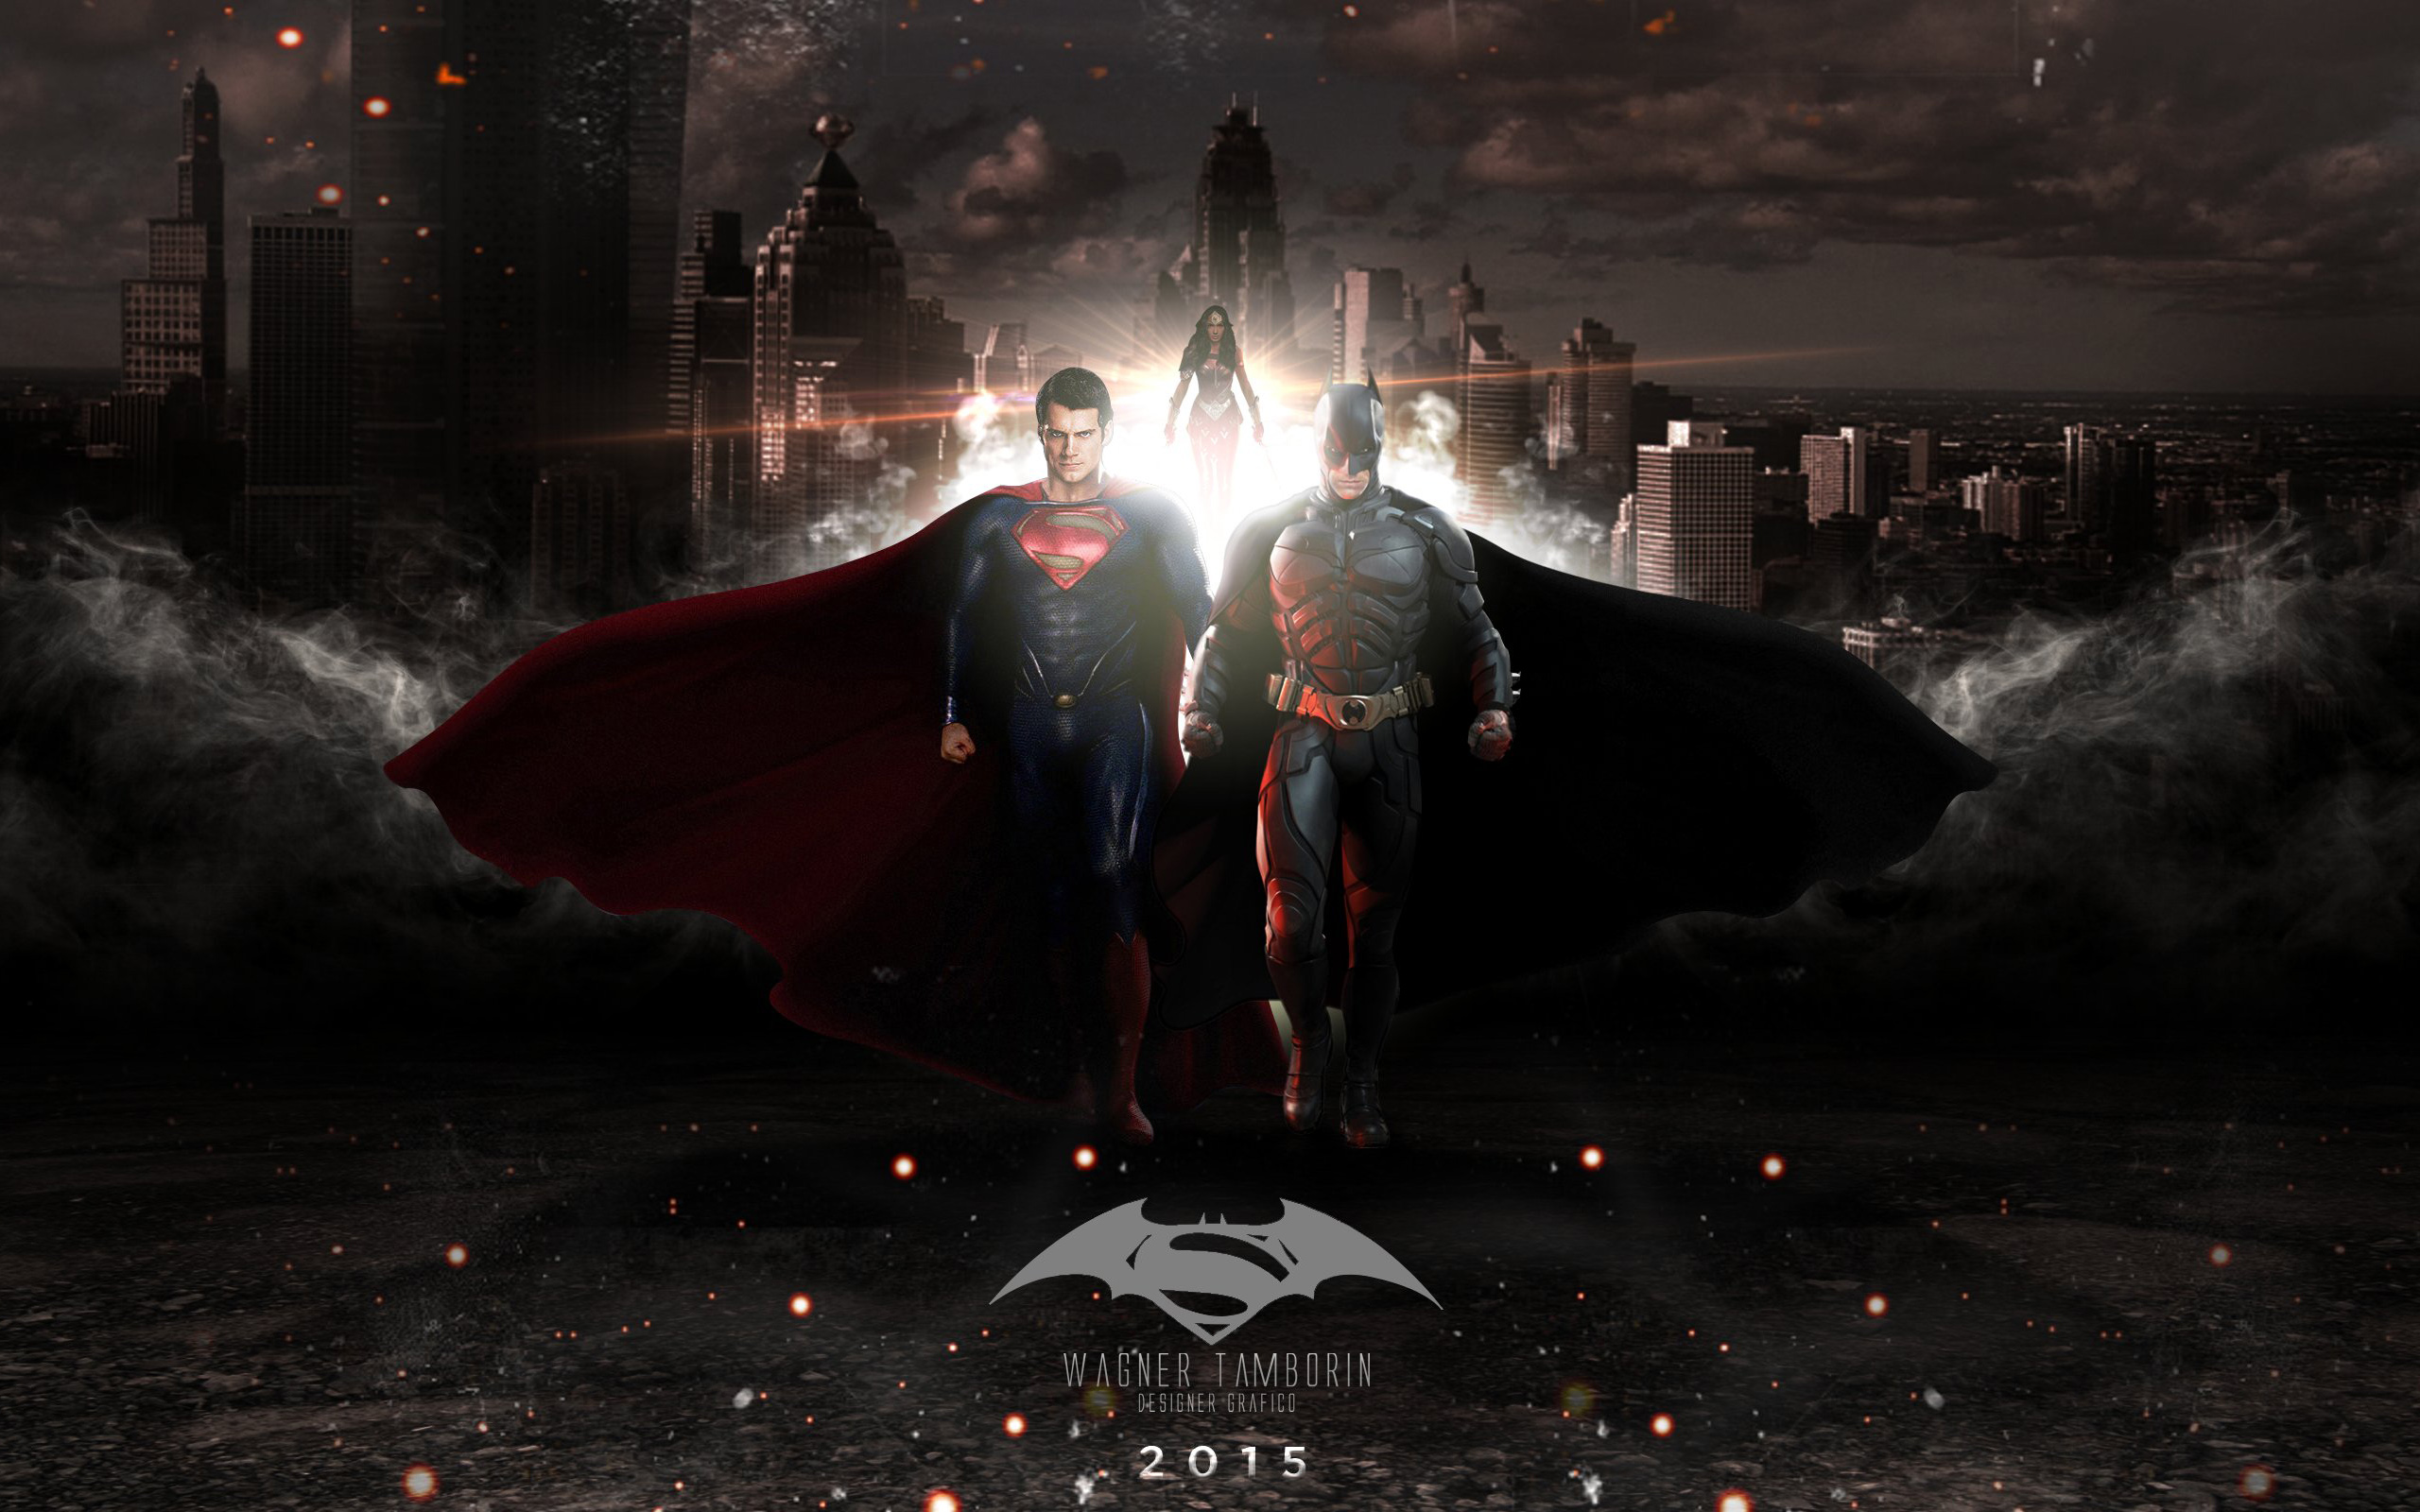 BATMAN VS SUPERMAN WALLPAPERS FREE Wallpapers Background images 2560x1600